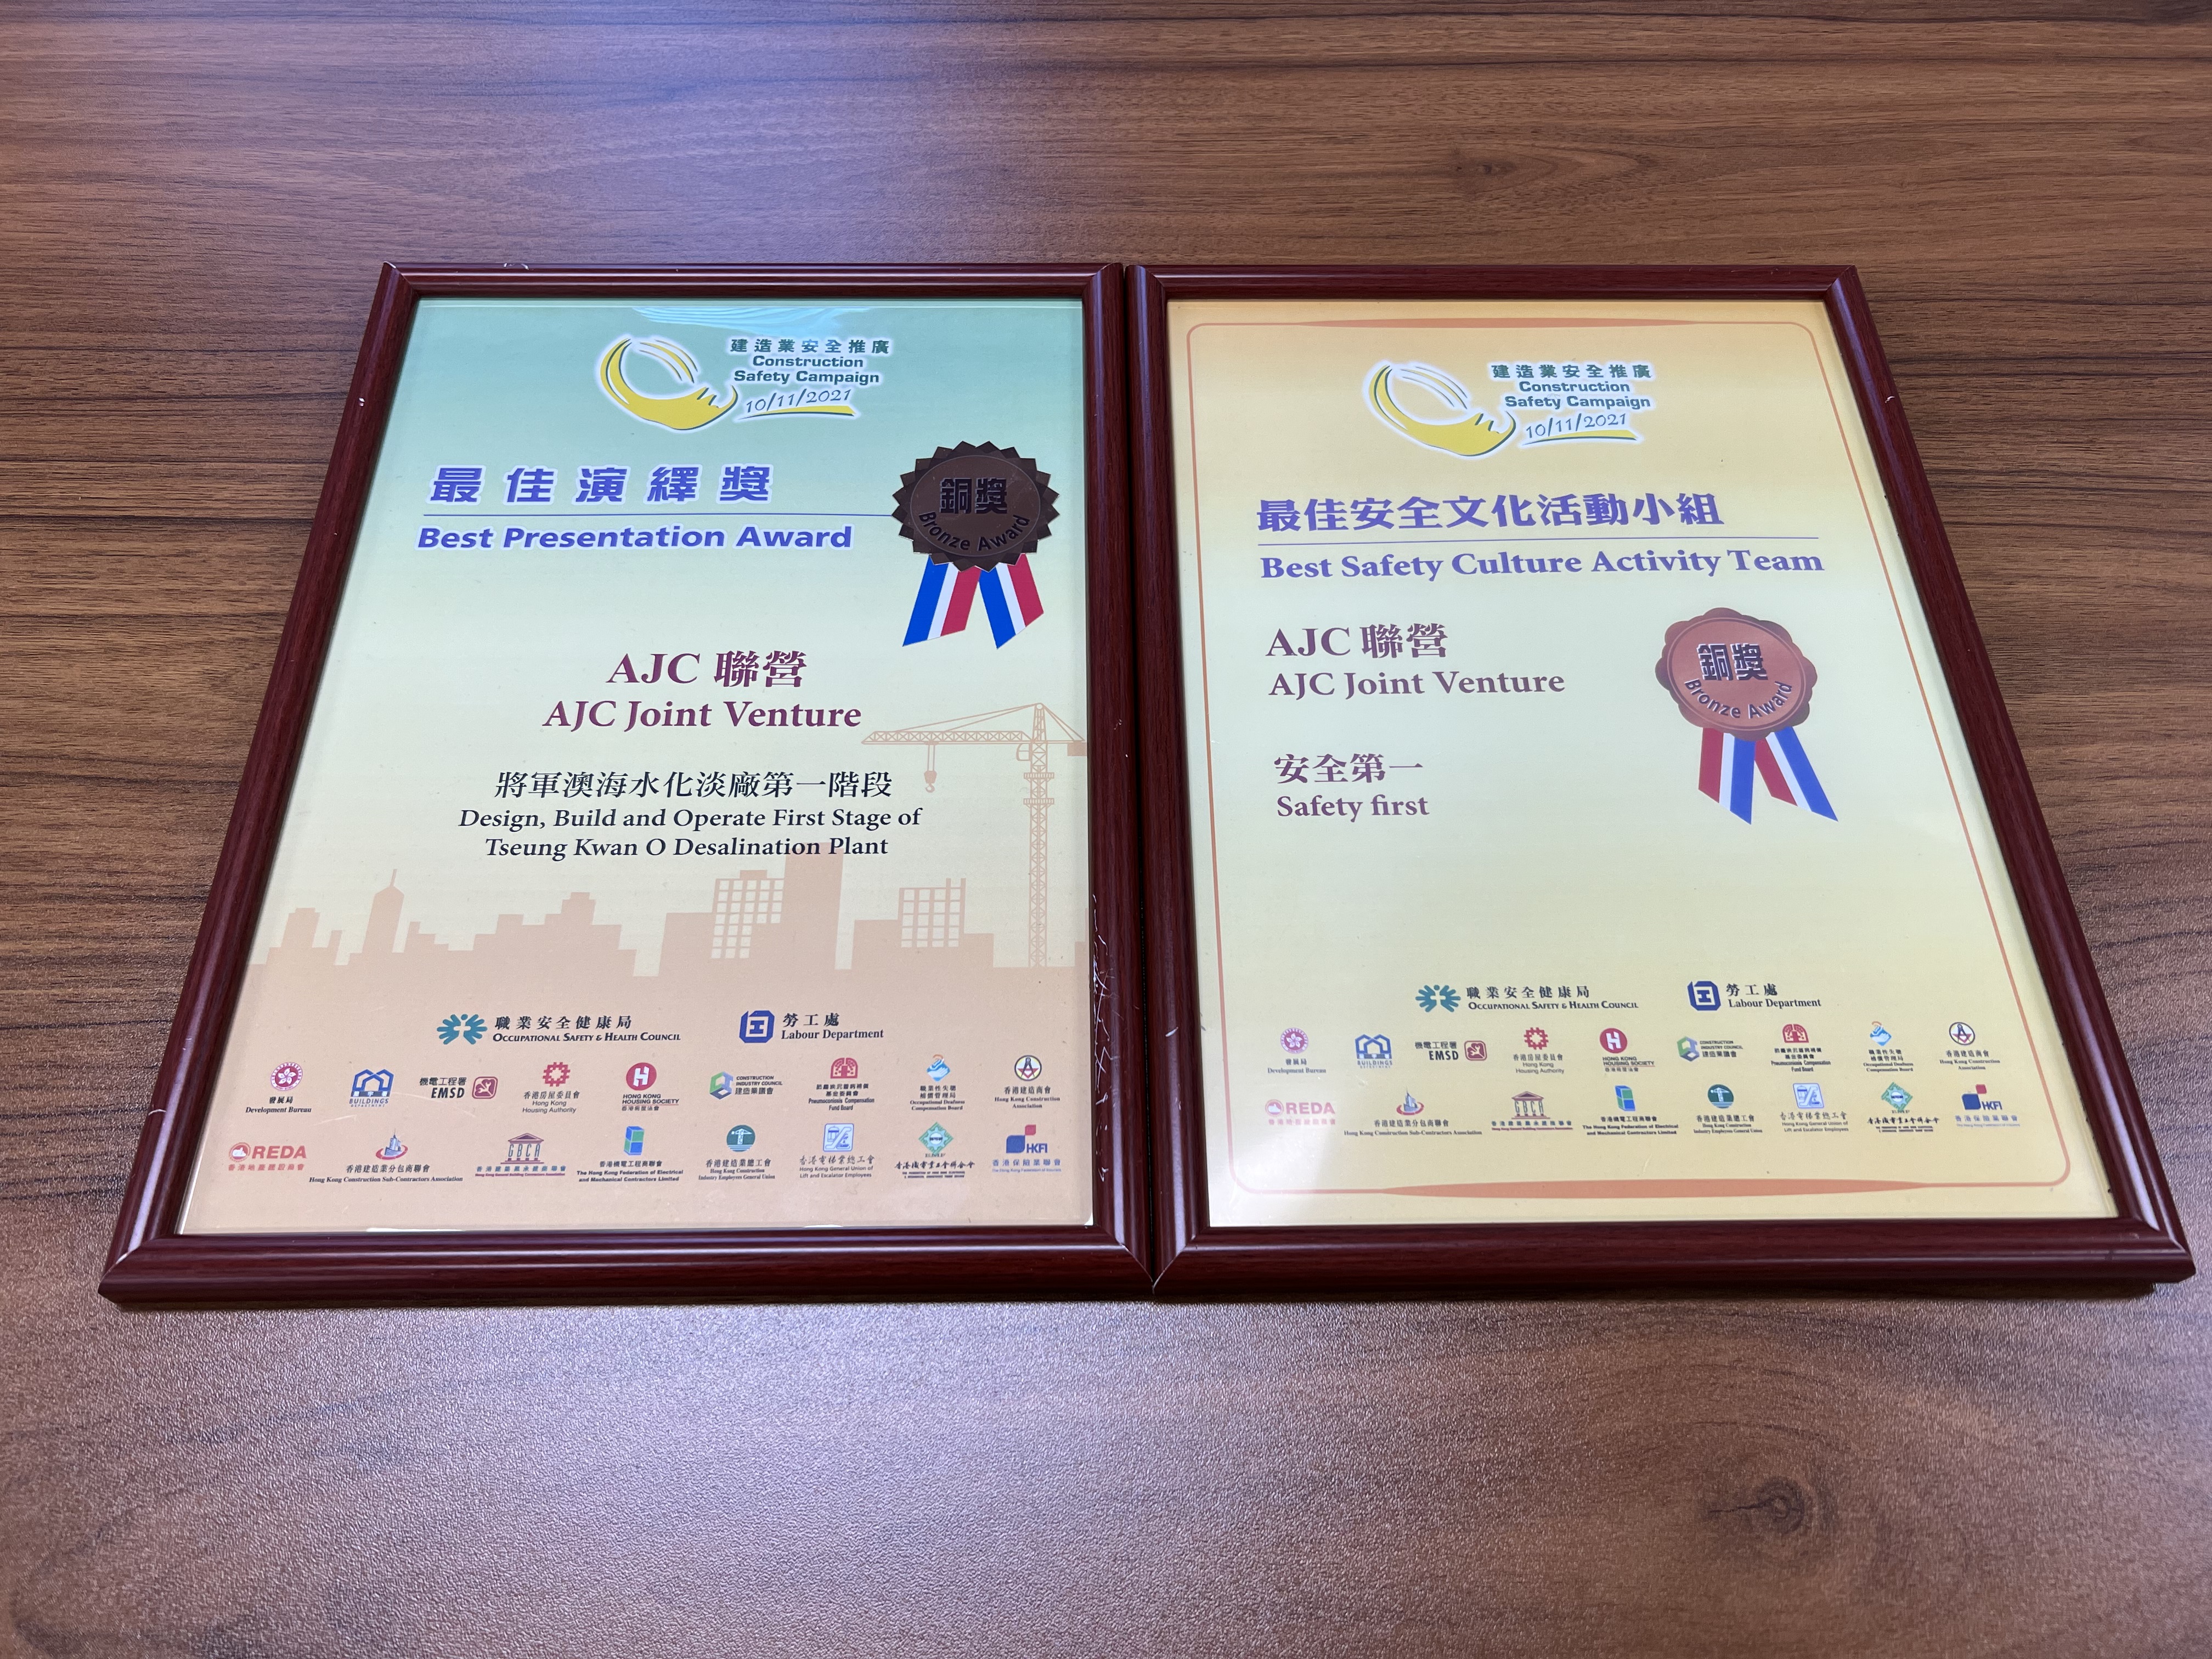 Construction Safety Campaign - The 22nd Construction Safety Award - Best Presentation Award & Best Safety Culture Activity Team